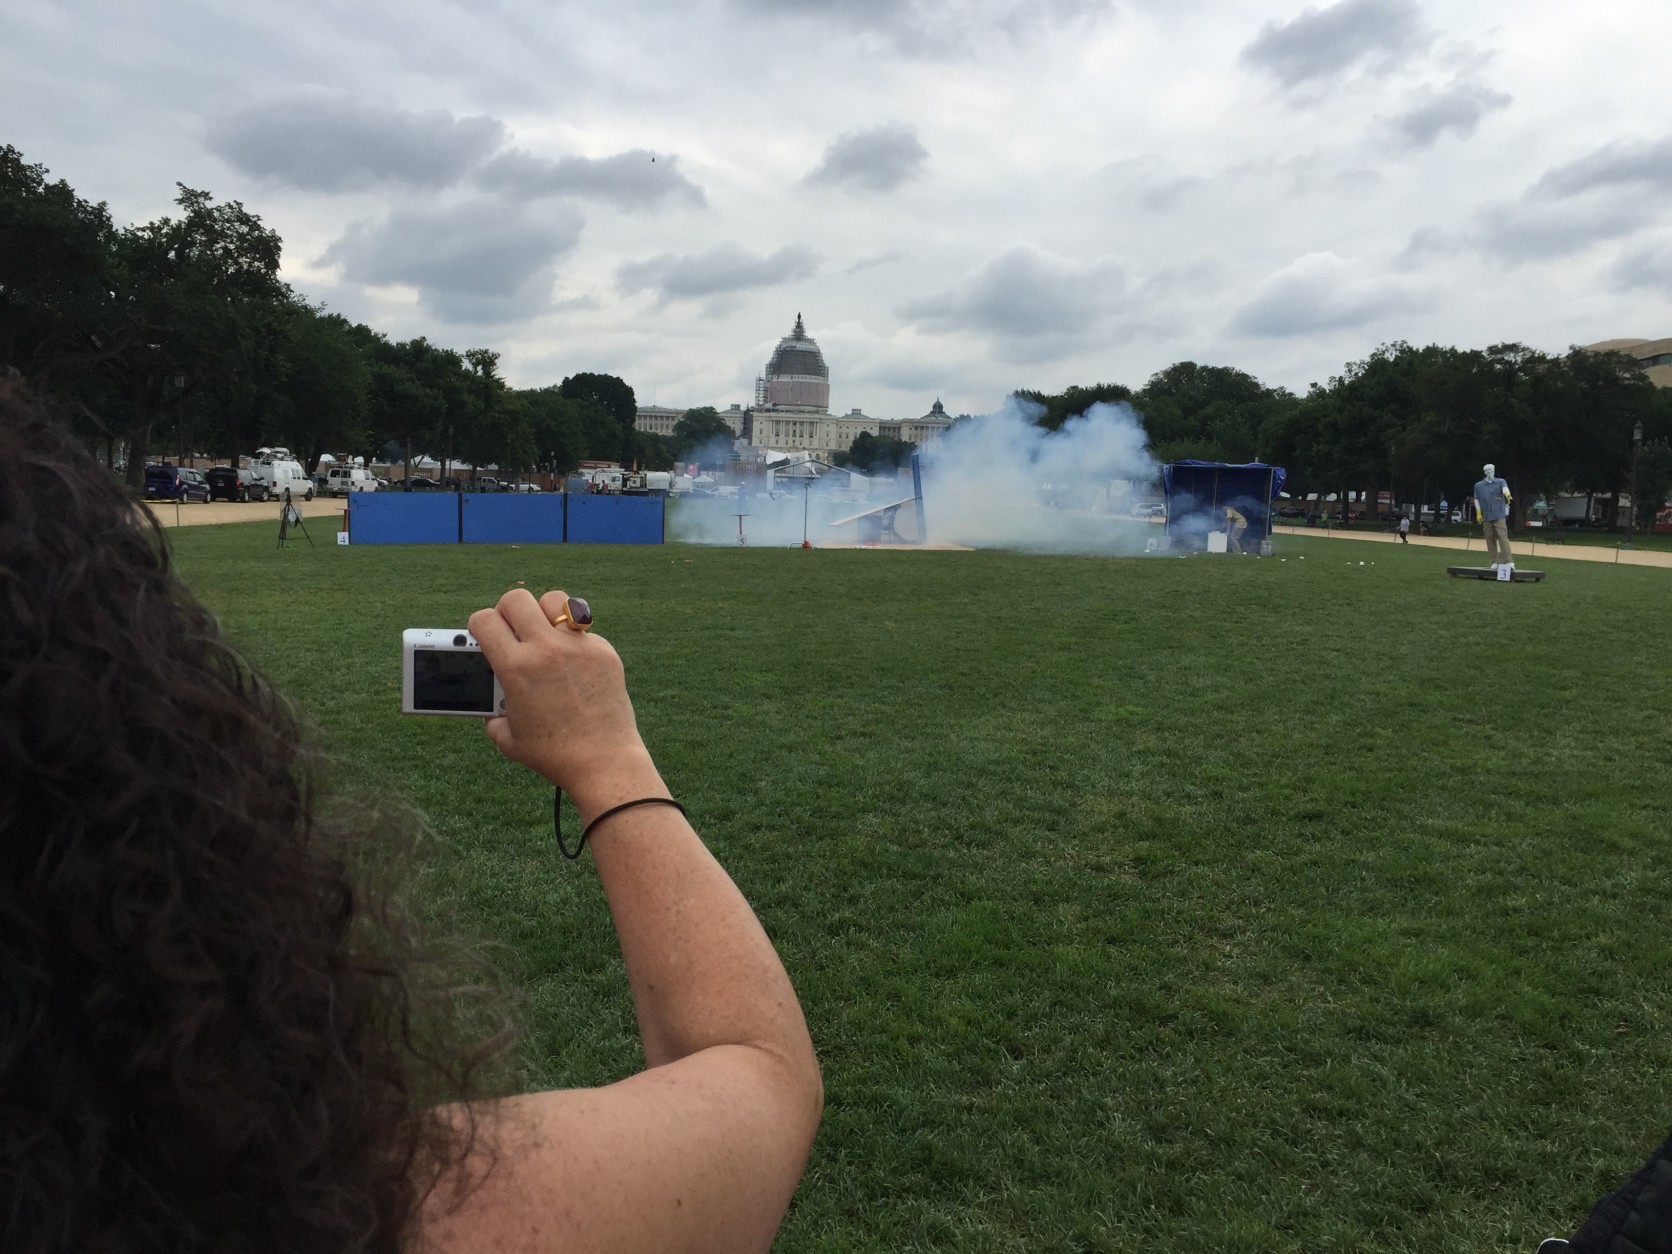 A CPSC demonstration of dangerous firework use created great interest on the National Mall June 26, 2015. (WTOP/Kristi King)